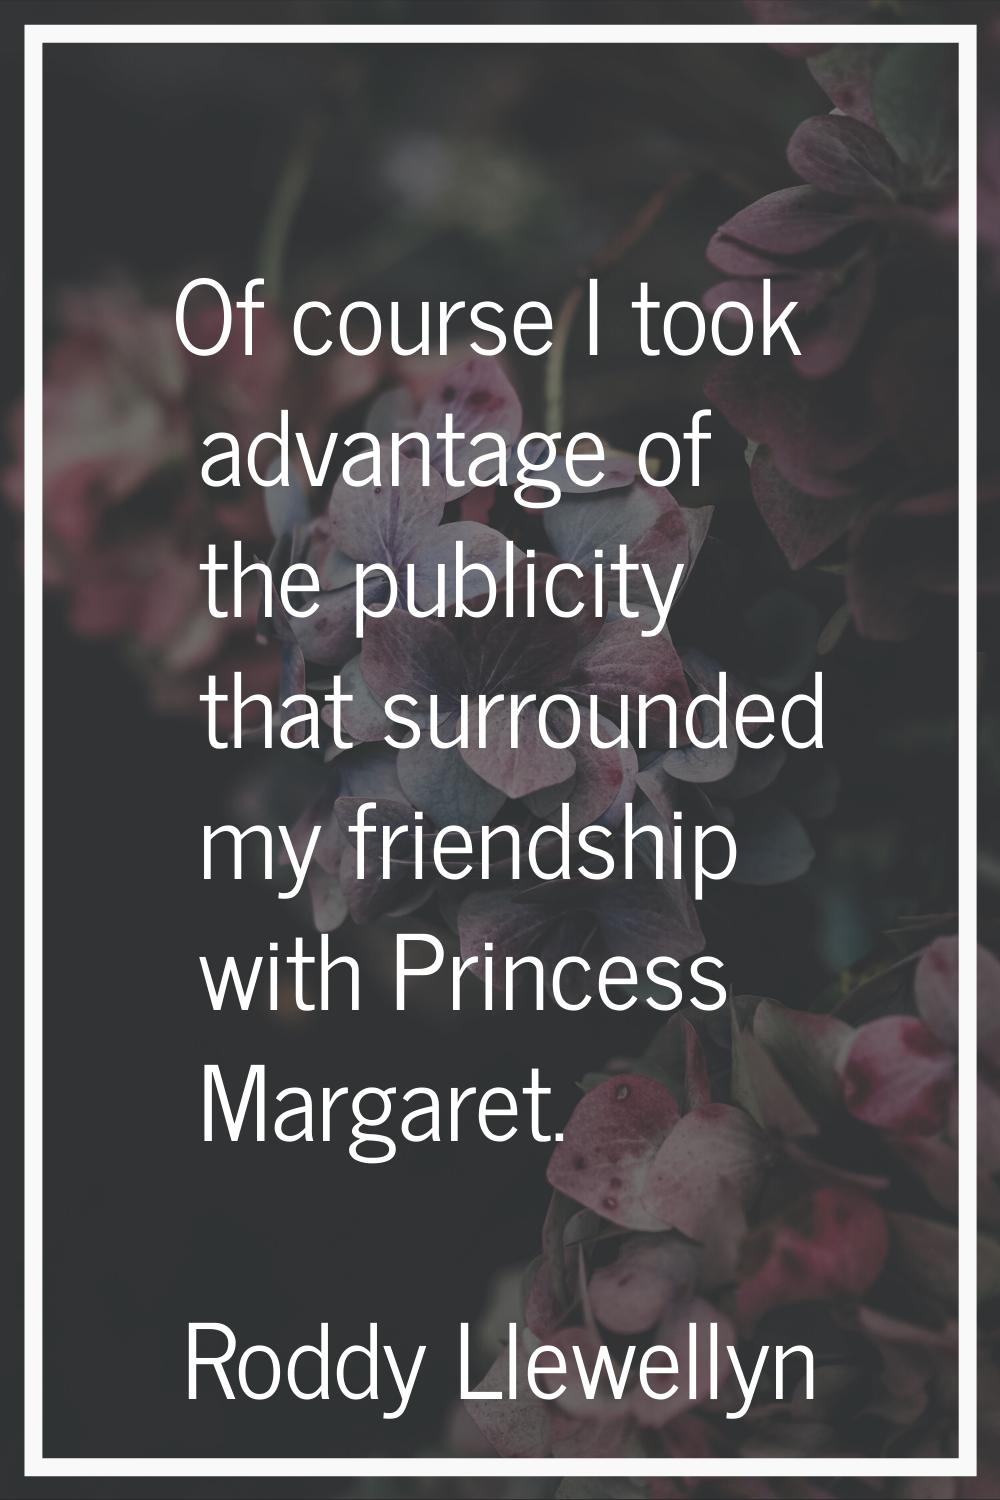 Of course I took advantage of the publicity that surrounded my friendship with Princess Margaret.